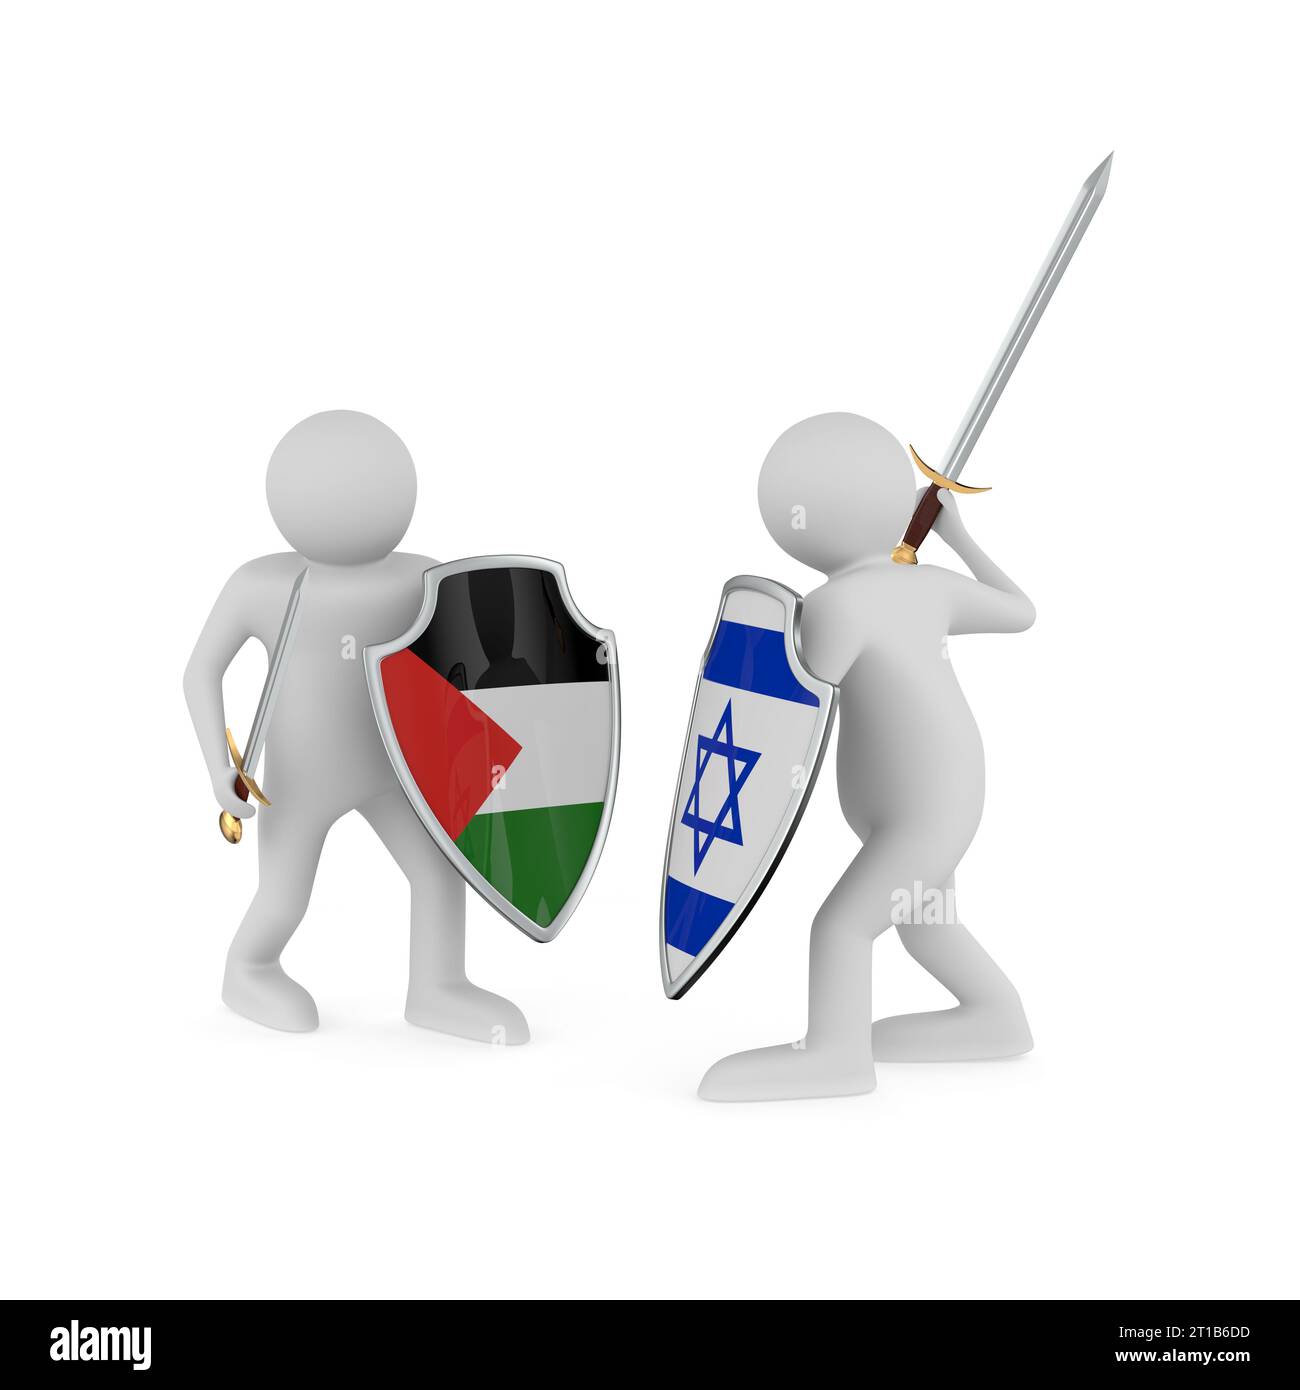 War between Palestine and Israel. Isolated 3D illustration Stock Photo